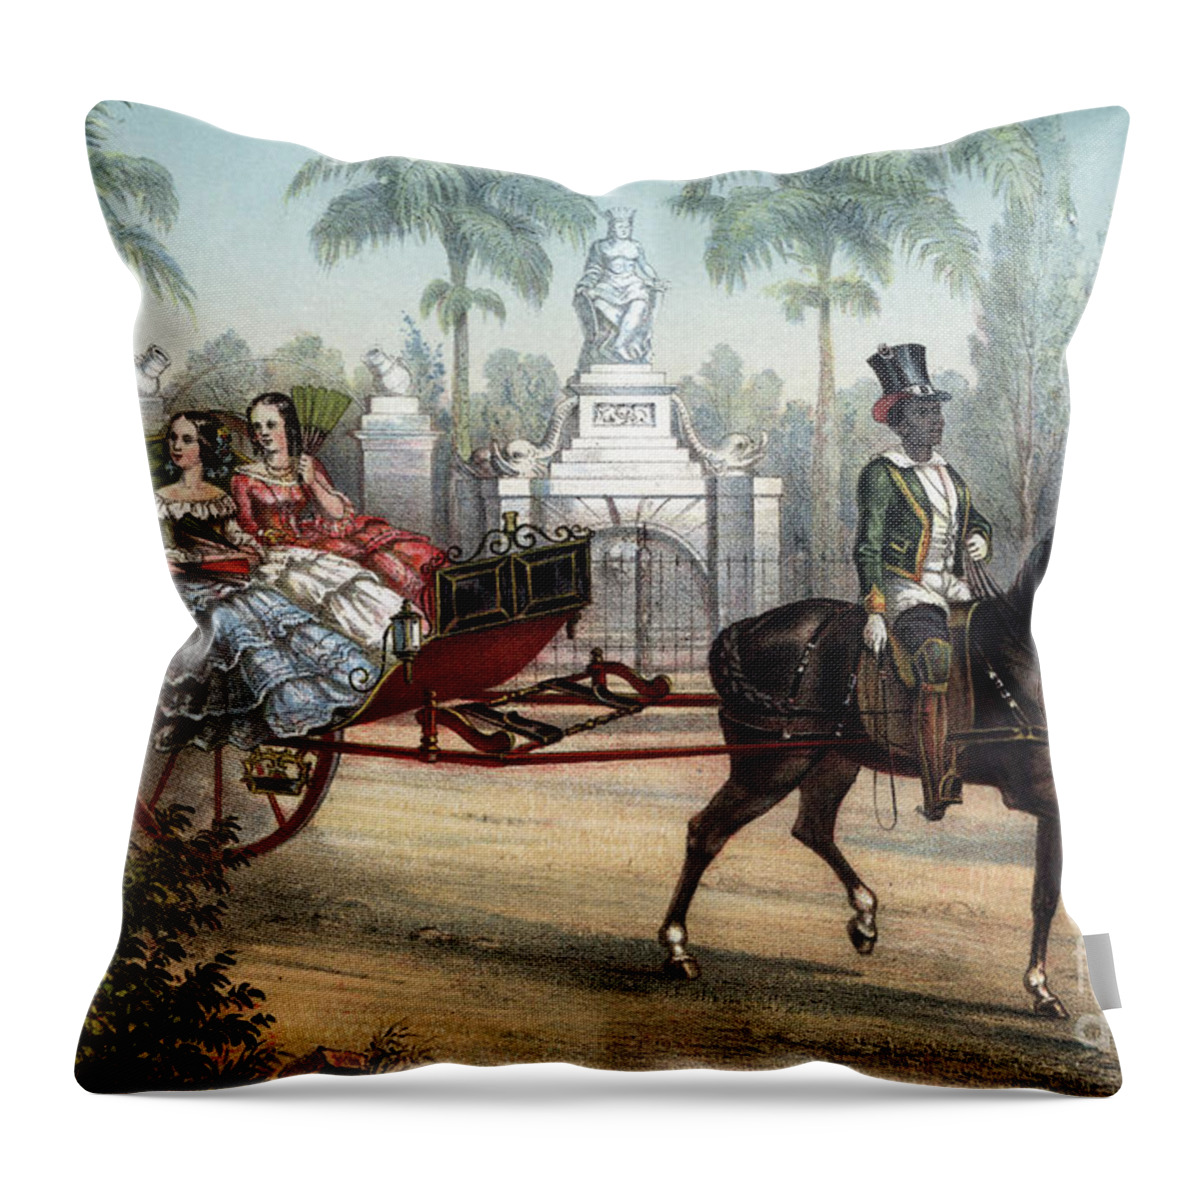 1855 Throw Pillow featuring the drawing Coachman with a horse and carriage in Cuba, 1855 by Granger